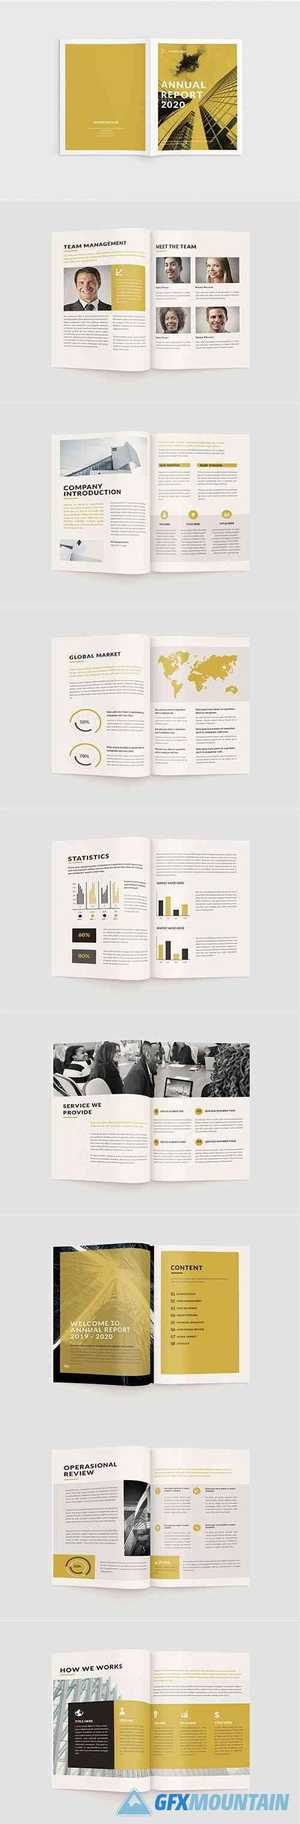 Yellow Annual Report 2020